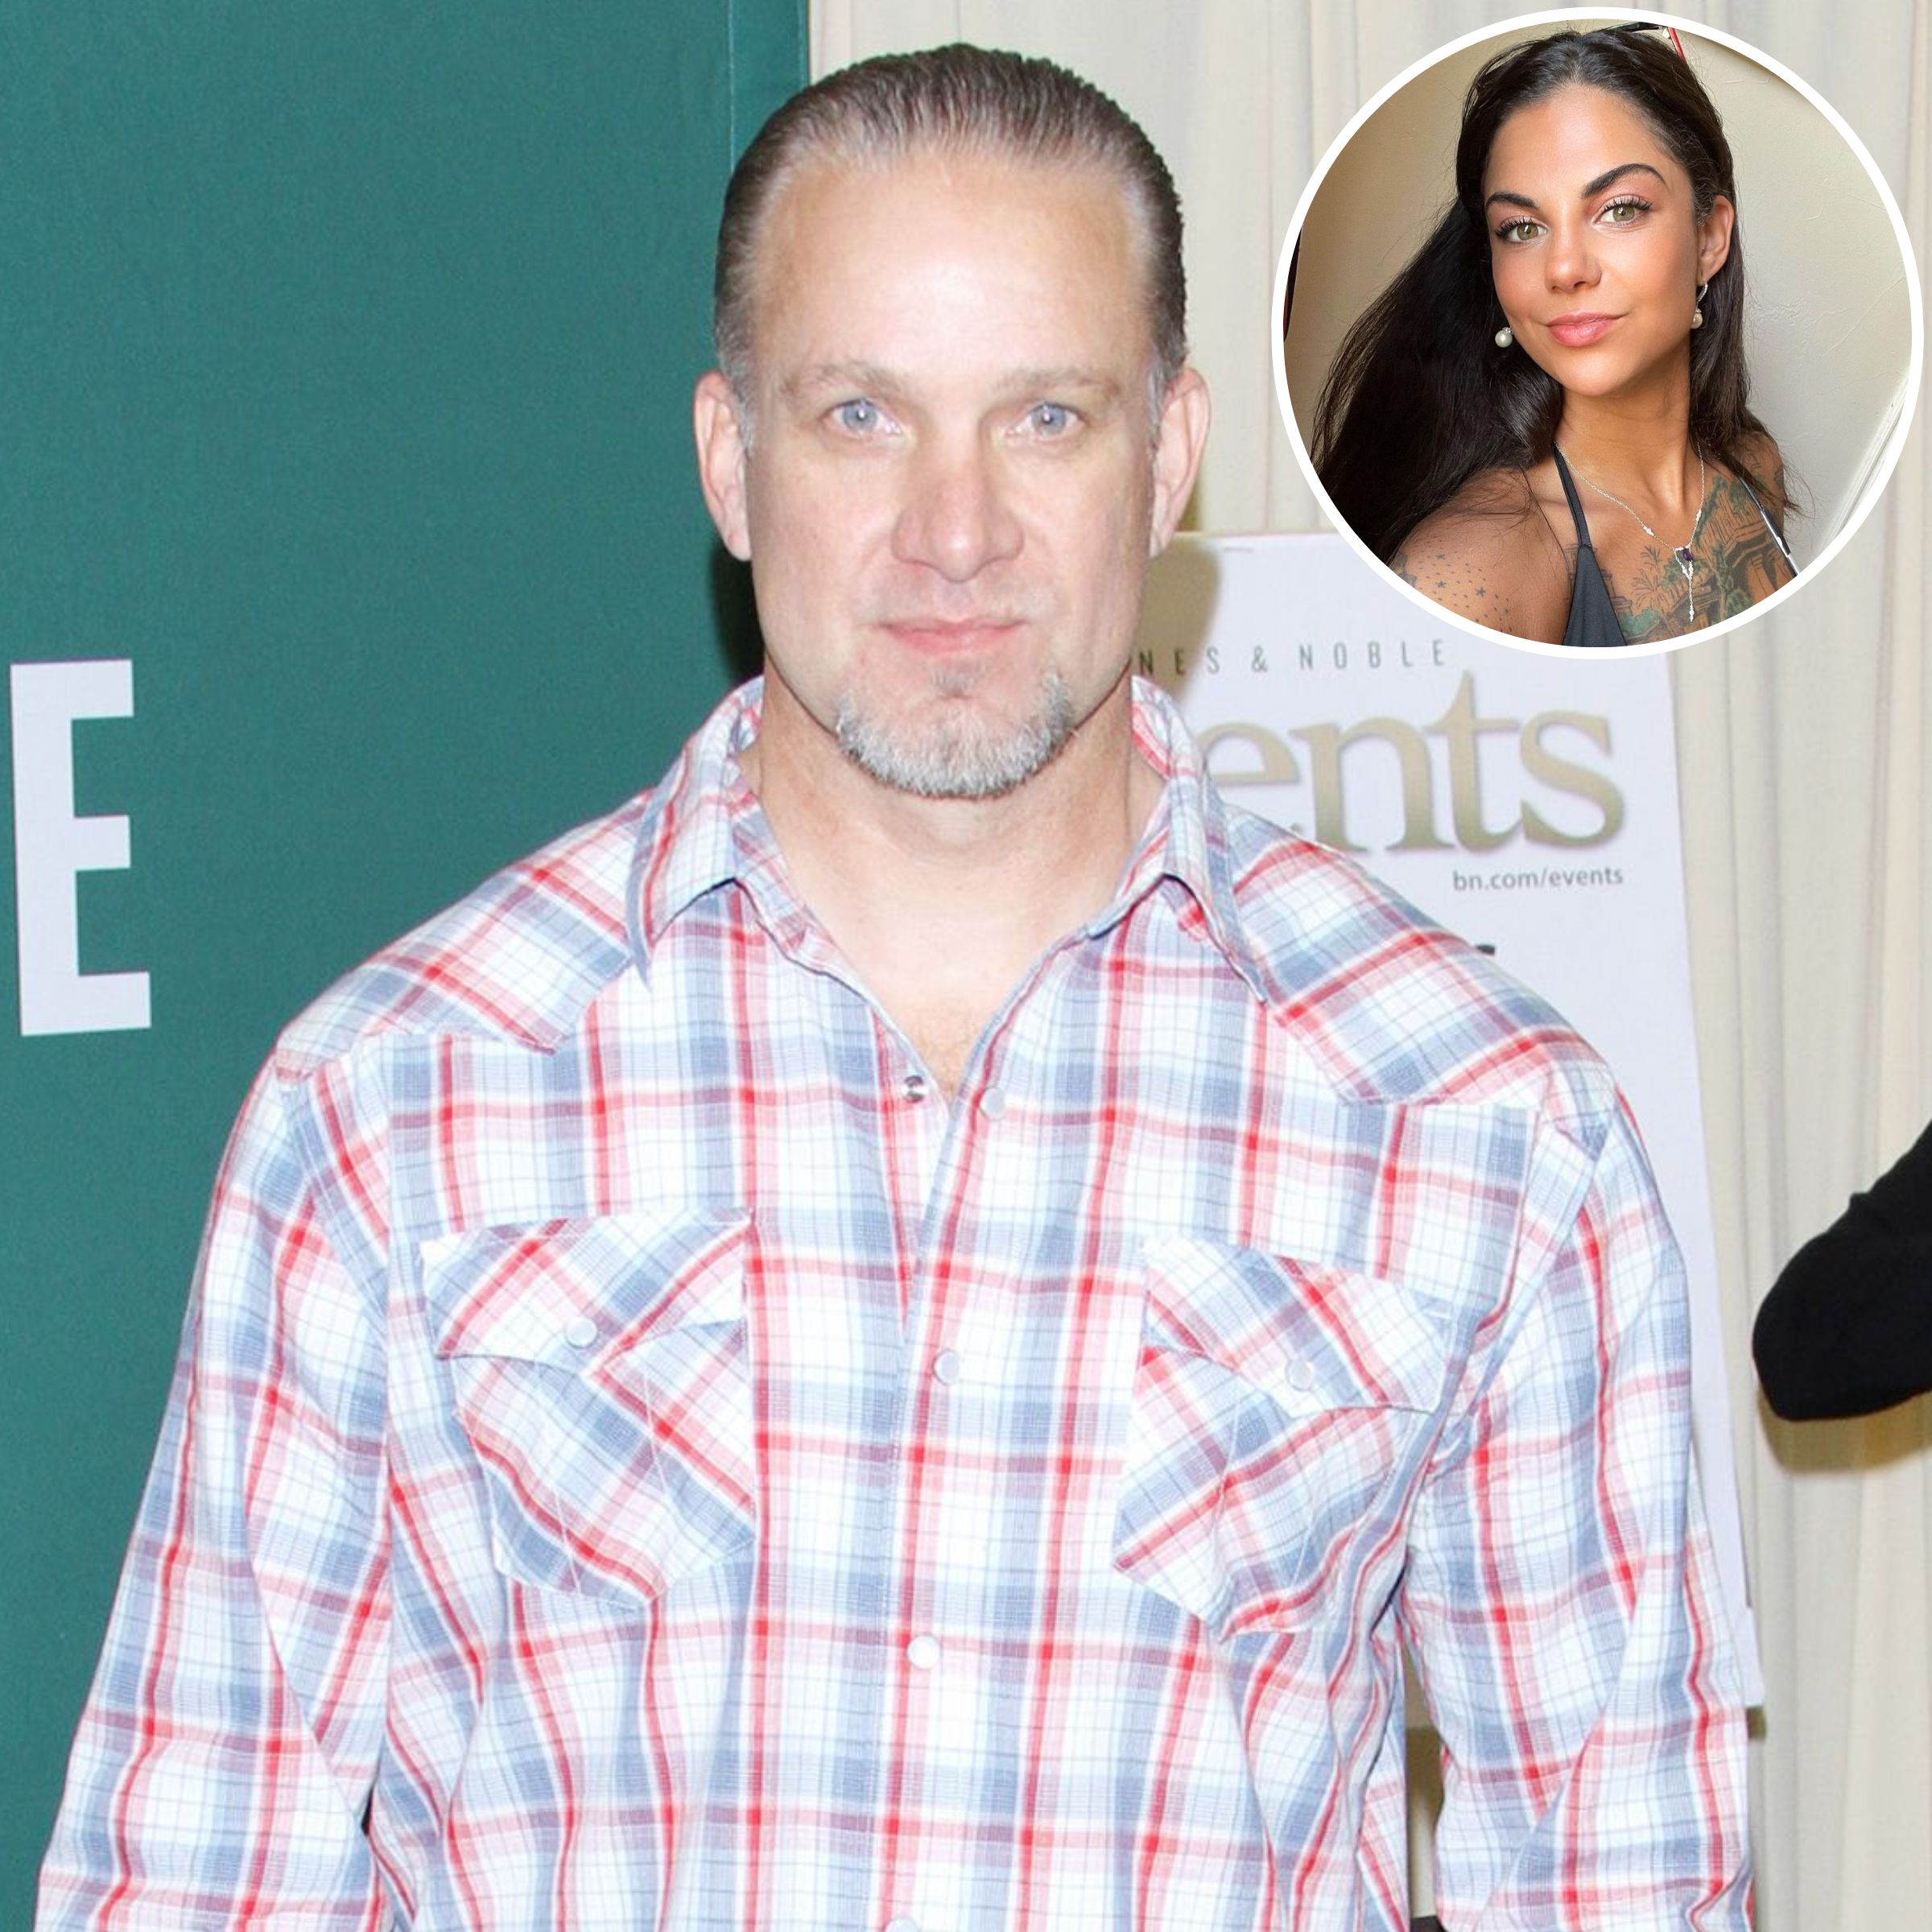 Jesse James Wife Bonnie Accuses Him of Cheating Statement